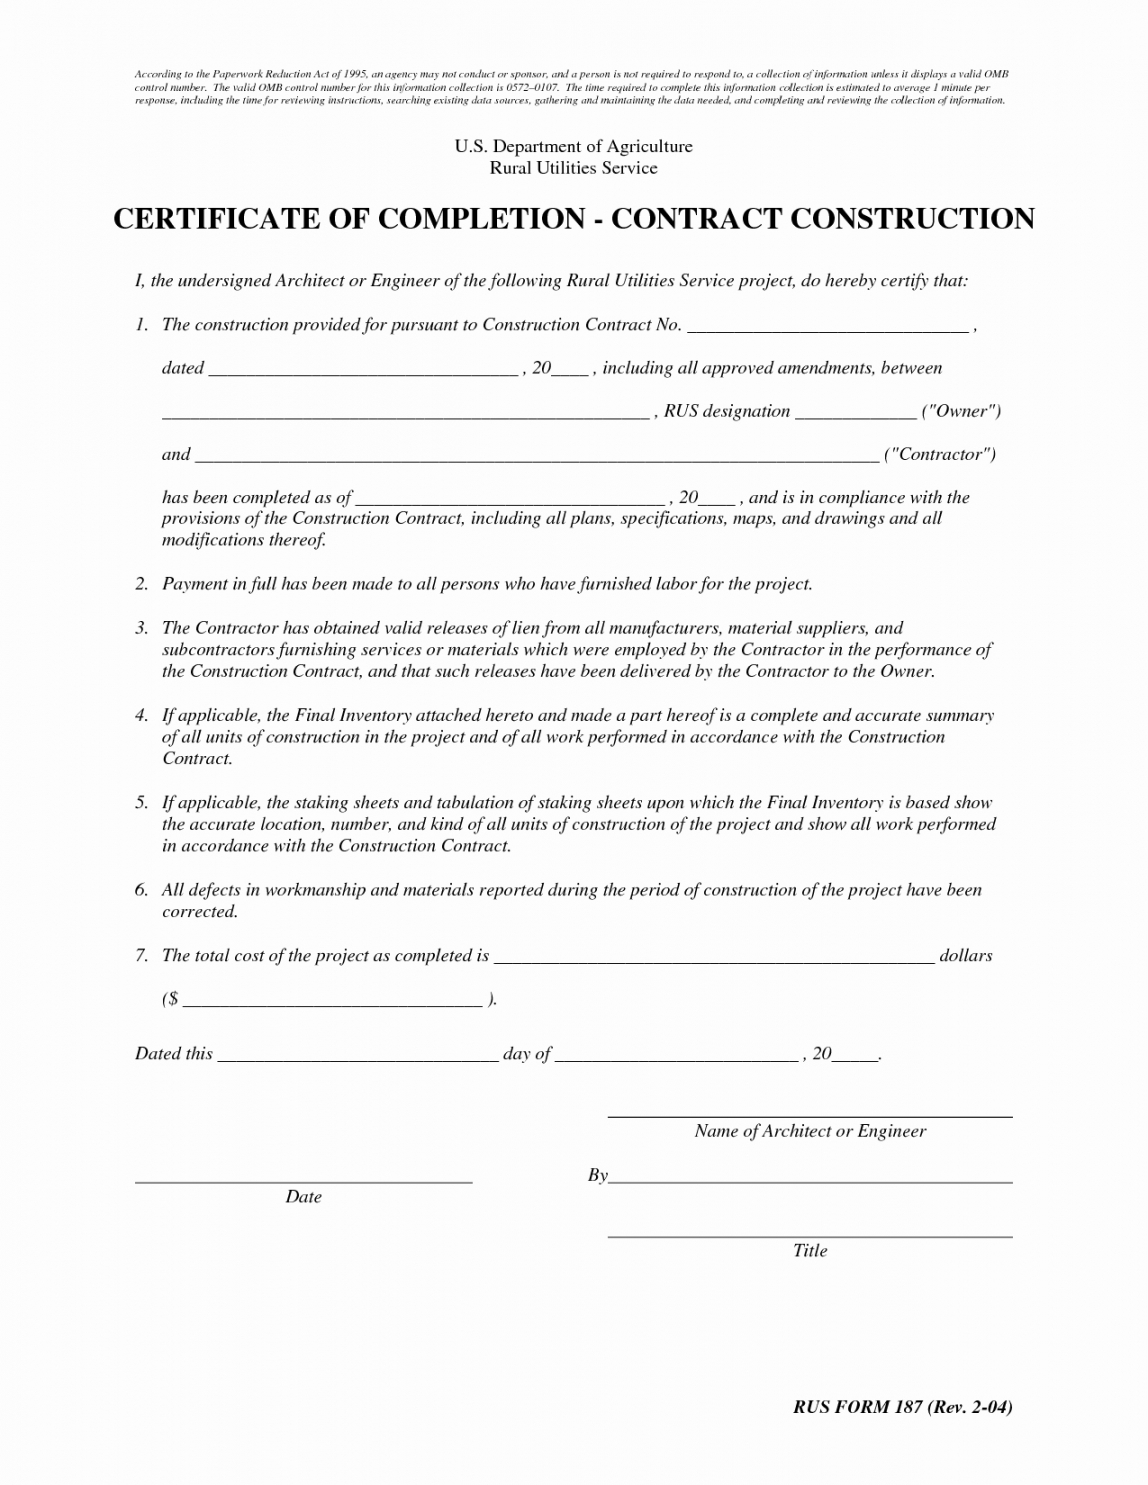 Free Certificate Of Completion Template Construction Design Regarding Certificate Of Completion Template Construction